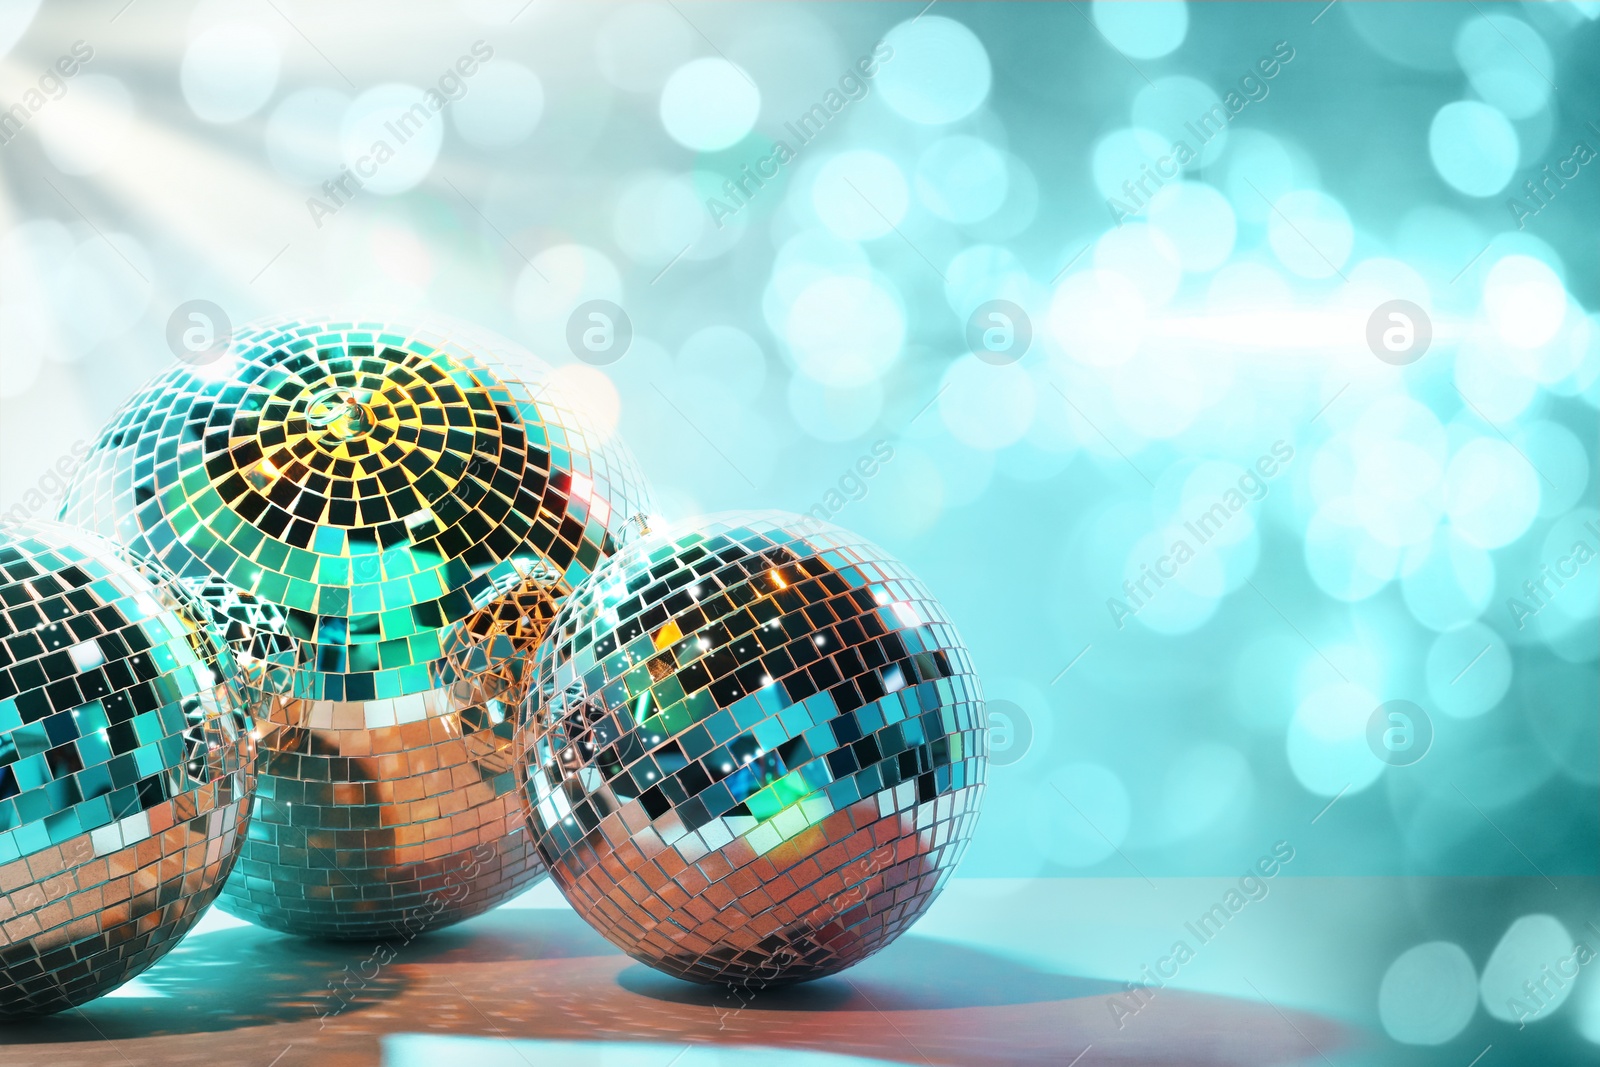 Image of Shiny disco balls on table against turquoise background with blurred lights, space for text. Bokeh effect